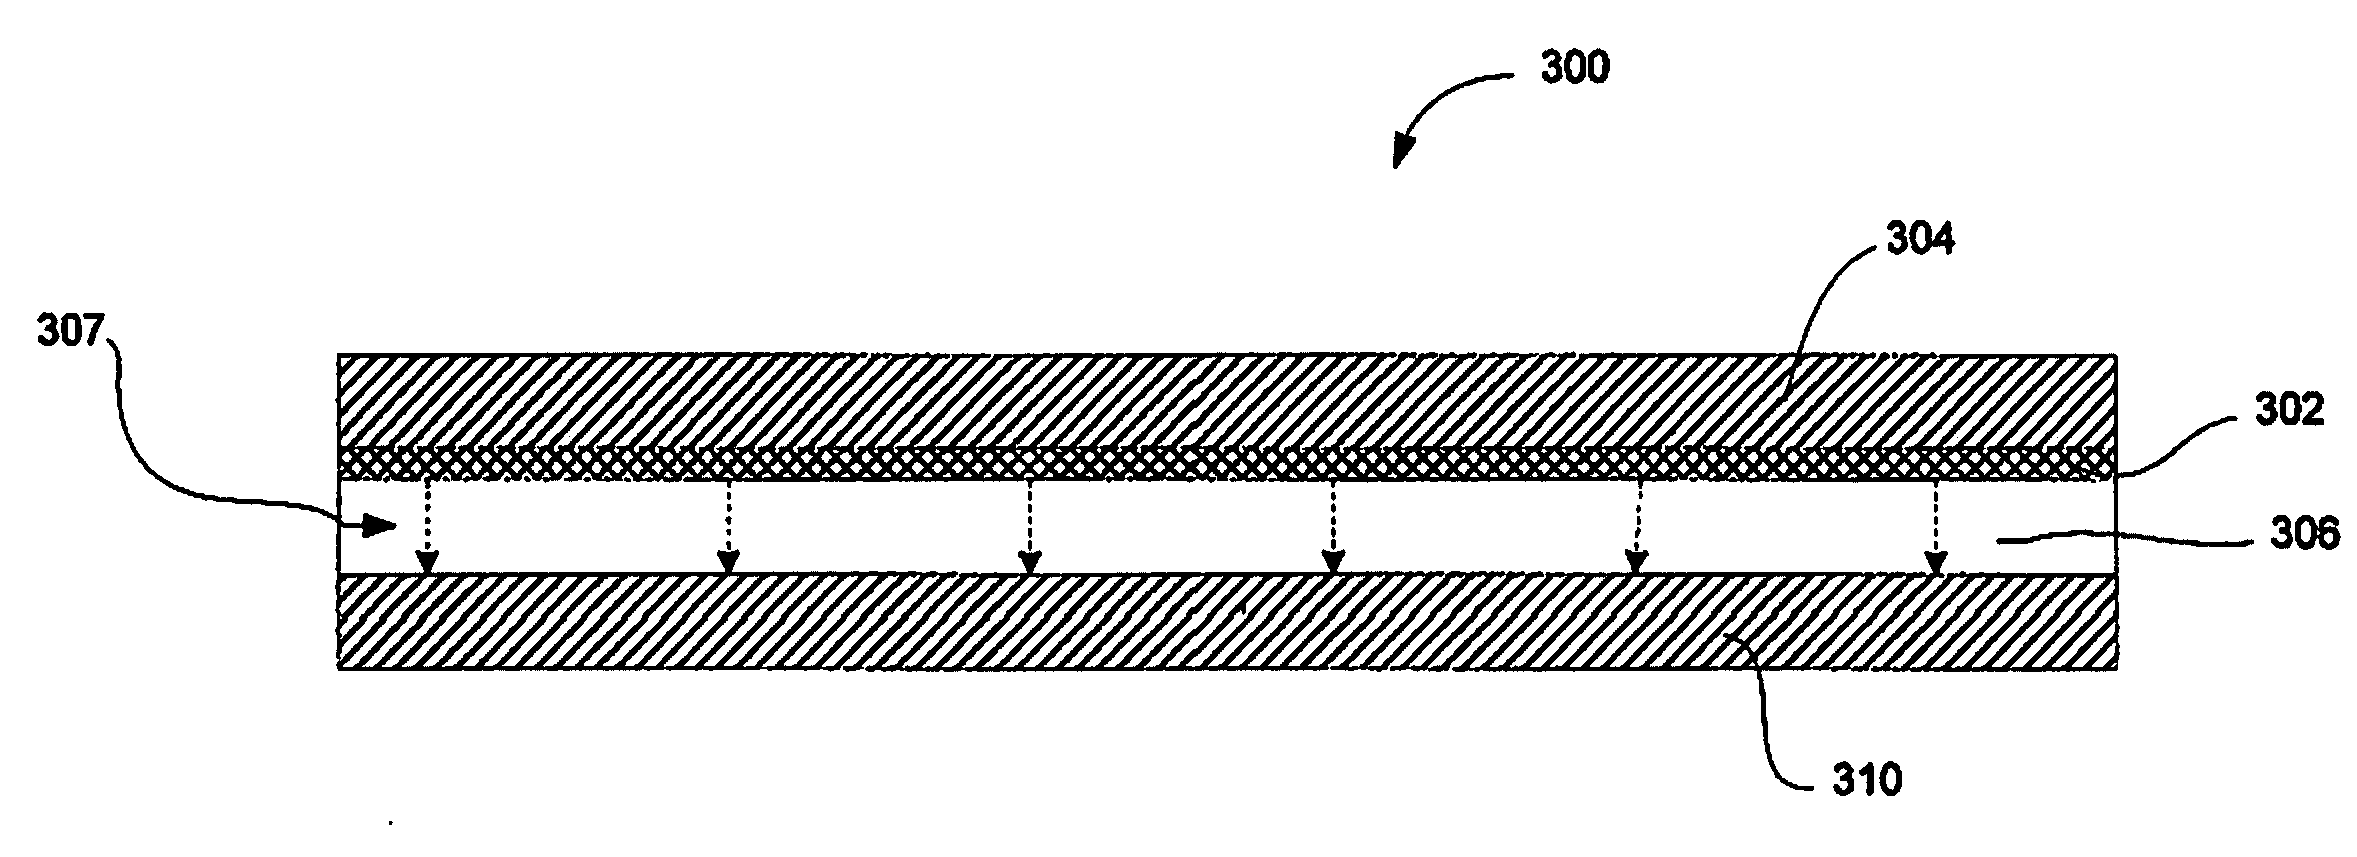 Thin film photovoltaic module having a lamination layer for enhanced reflection and photovoltaic output